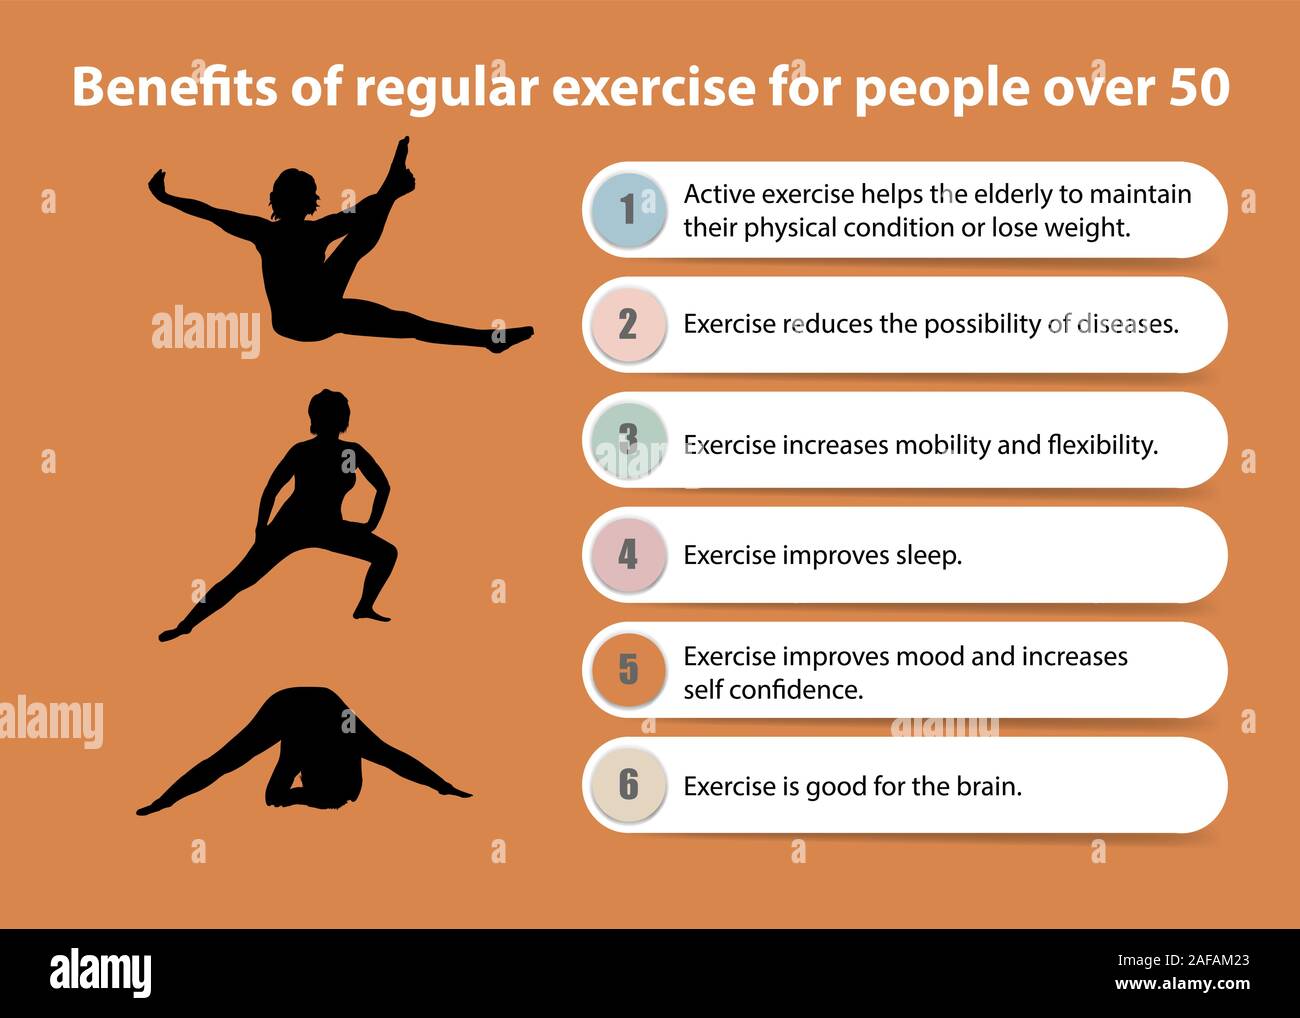 Benefits of regular exercise for people over 50 presentation